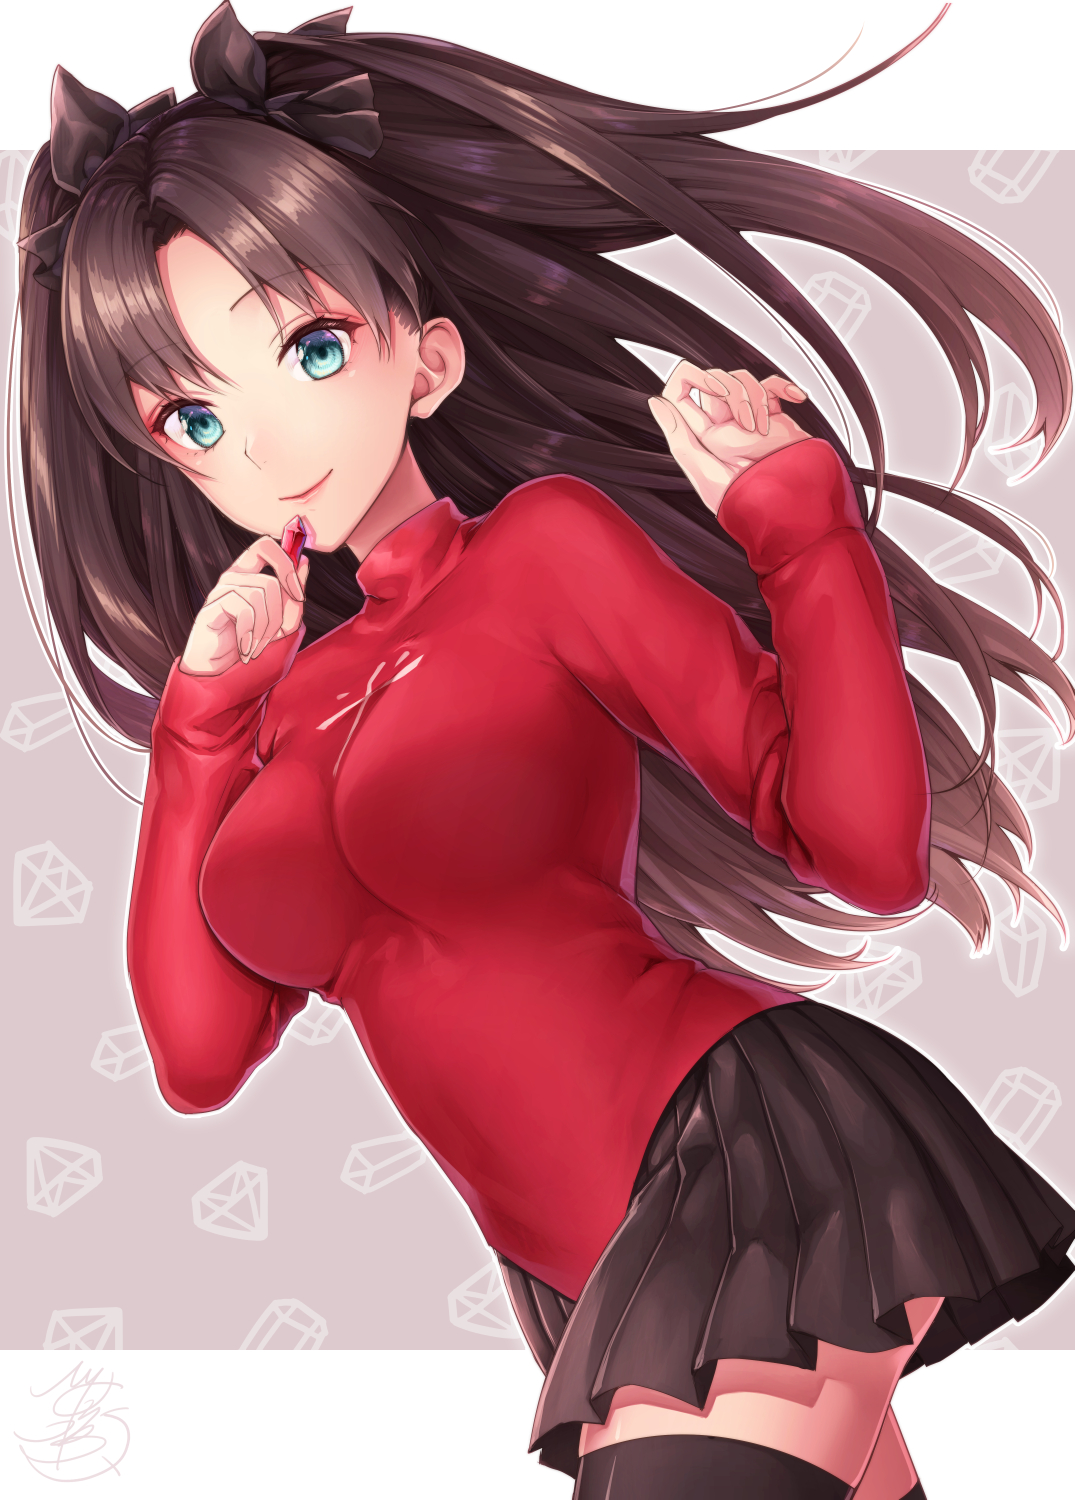 Anime Anime Girls Fate Series Fate Stay Night Unlimited Blade Works Fate Stay Night Fate Grand Order 1075x1500